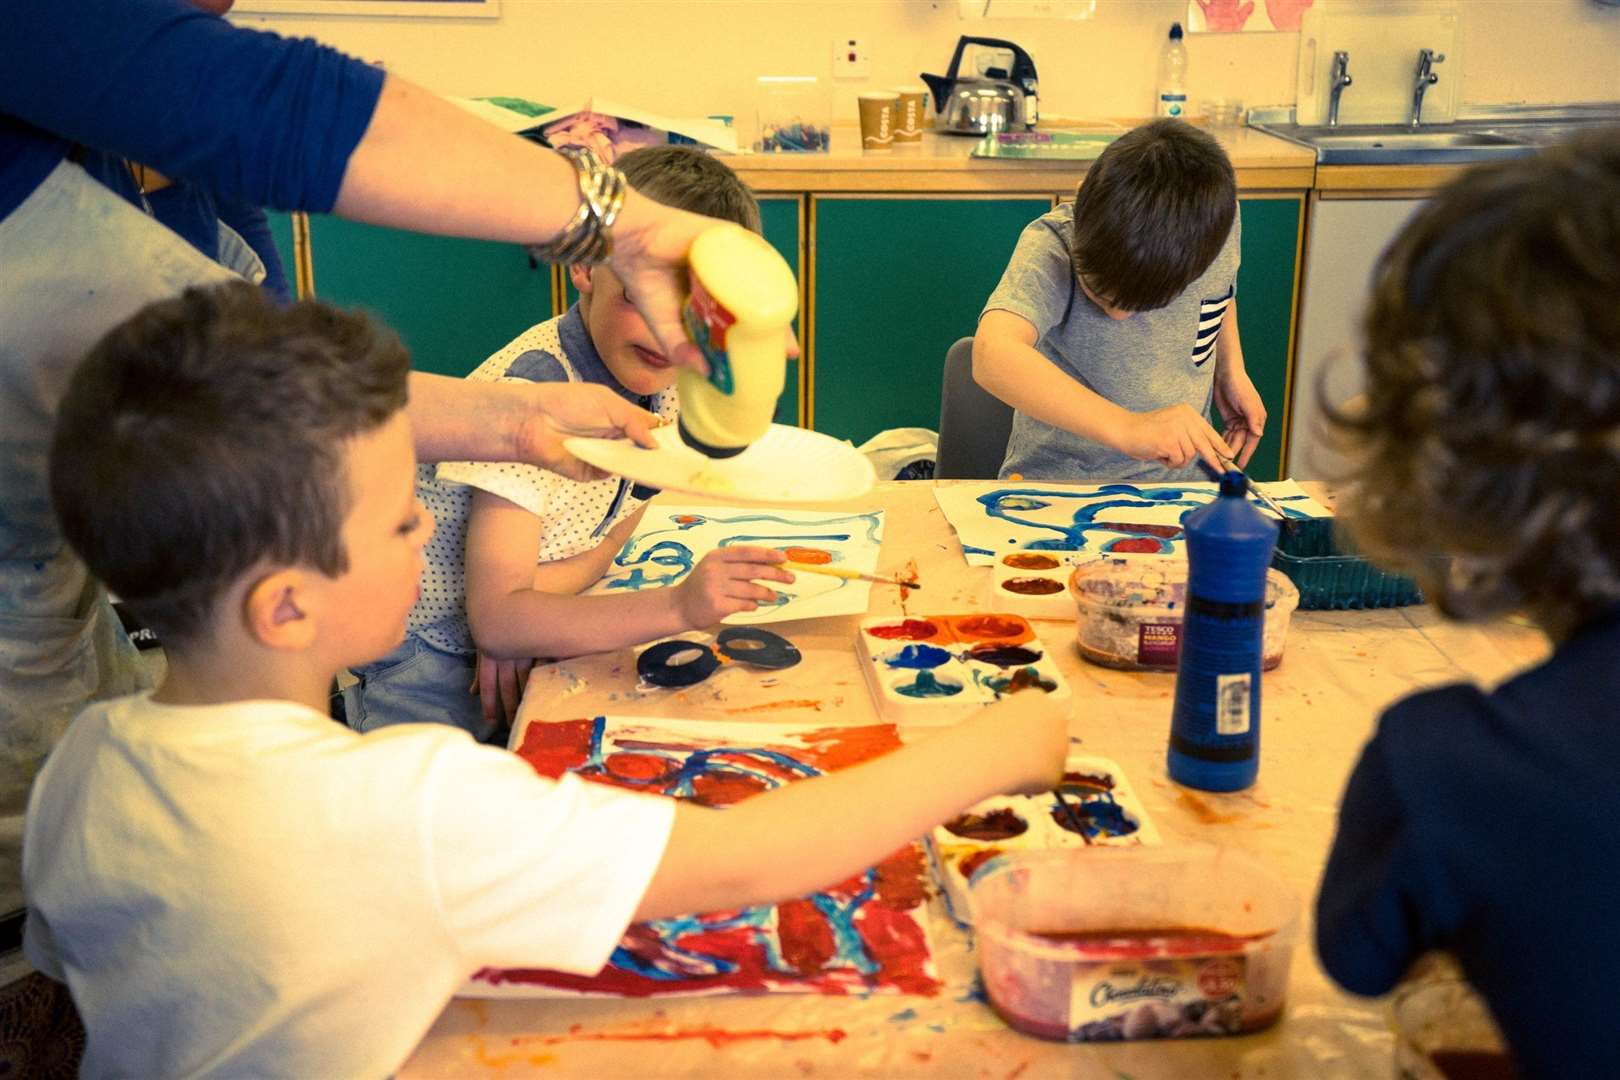 The Youth Small Grants Scheme aims to help fund projects workign with young people. Picture: Findorn Bay Arts